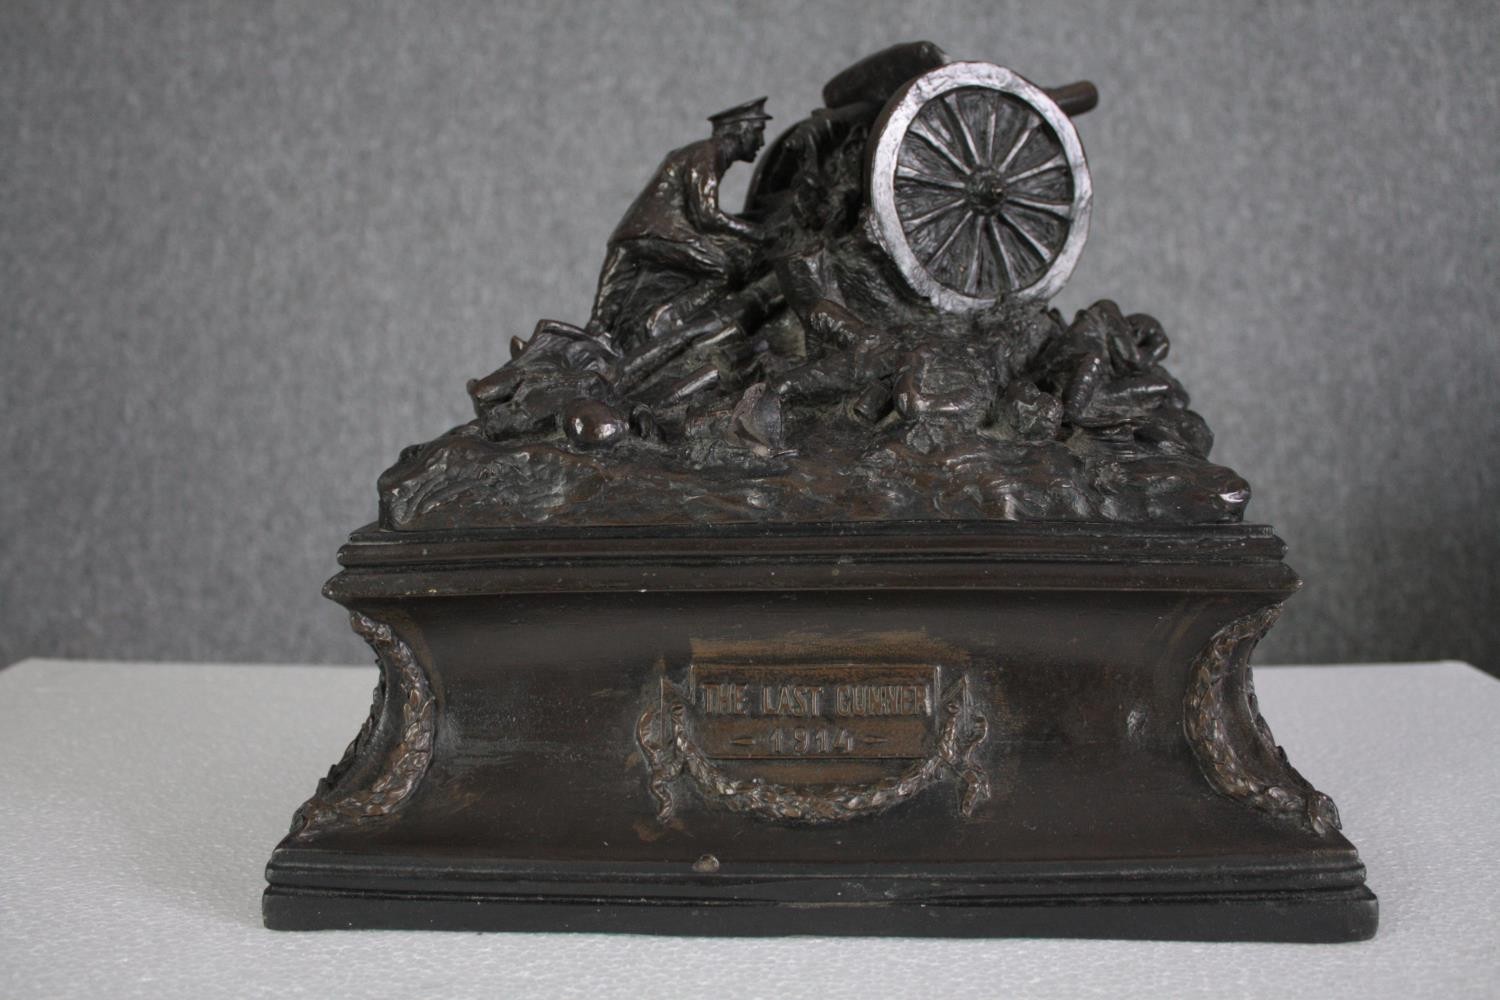 Vincent Gattai (active 1915). Titled on the plinth, 'The Last Gunner'. A lone artilleryman is - Image 7 of 10